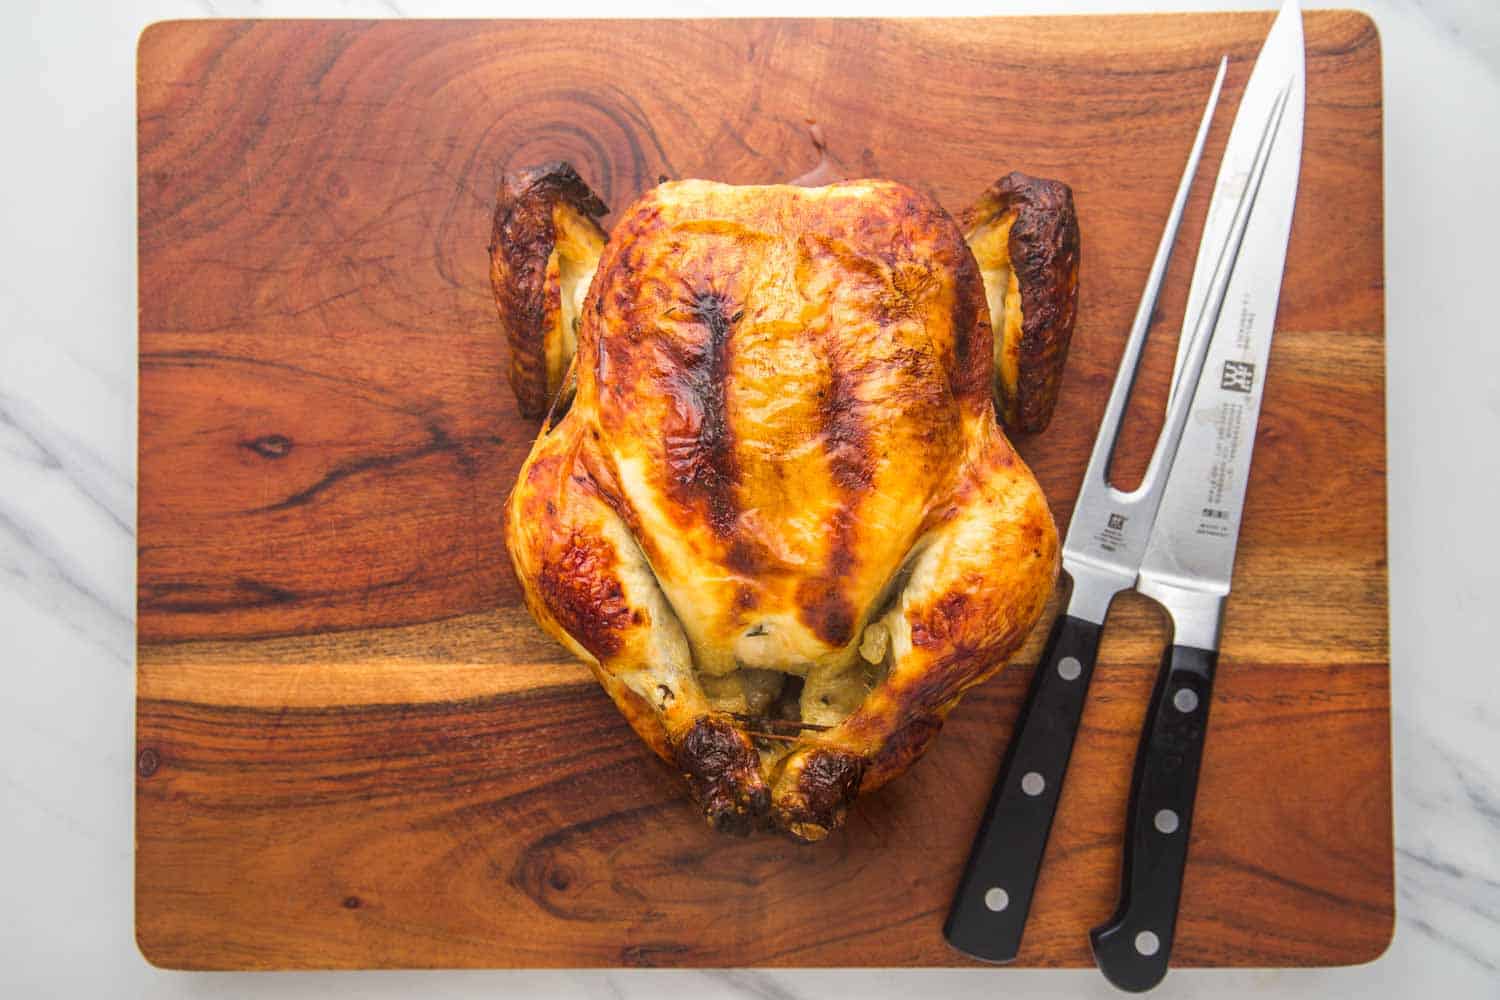 Roast chicken on a wooden cutting board with a sharp carving knife and a carving fork.